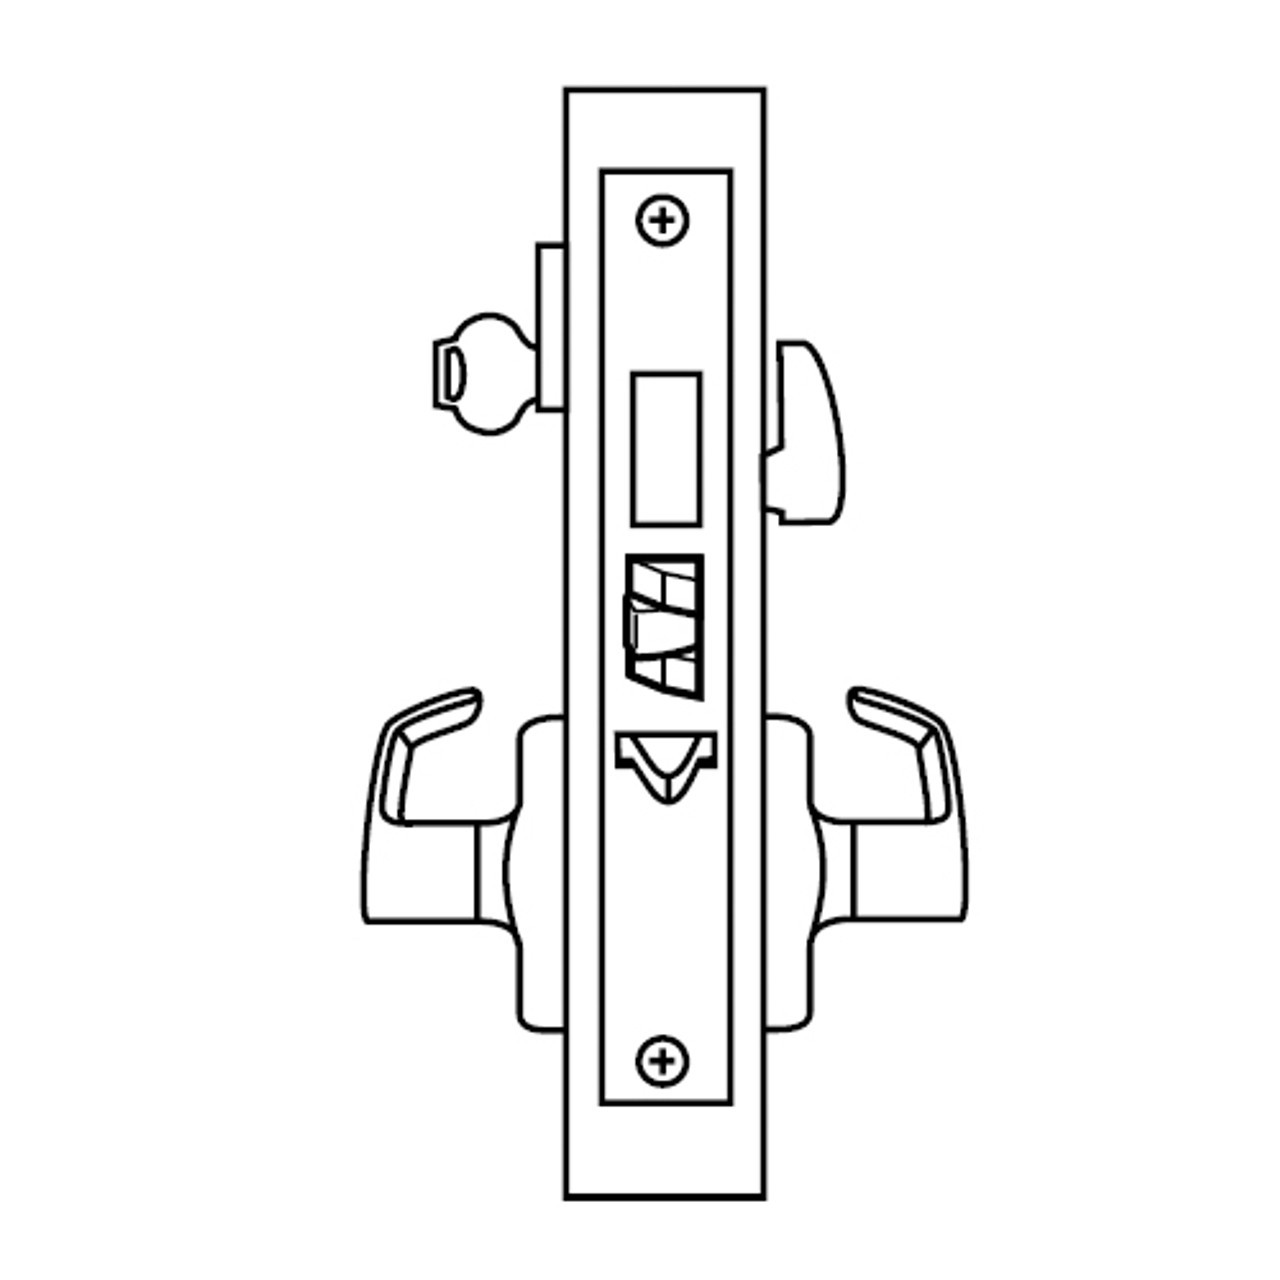 ML2075-ESA-619-LC Corbin Russwin ML2000 Series Mortise Entrance or Office Security Locksets with Essex Lever and Deadbolt in Satin Nickel